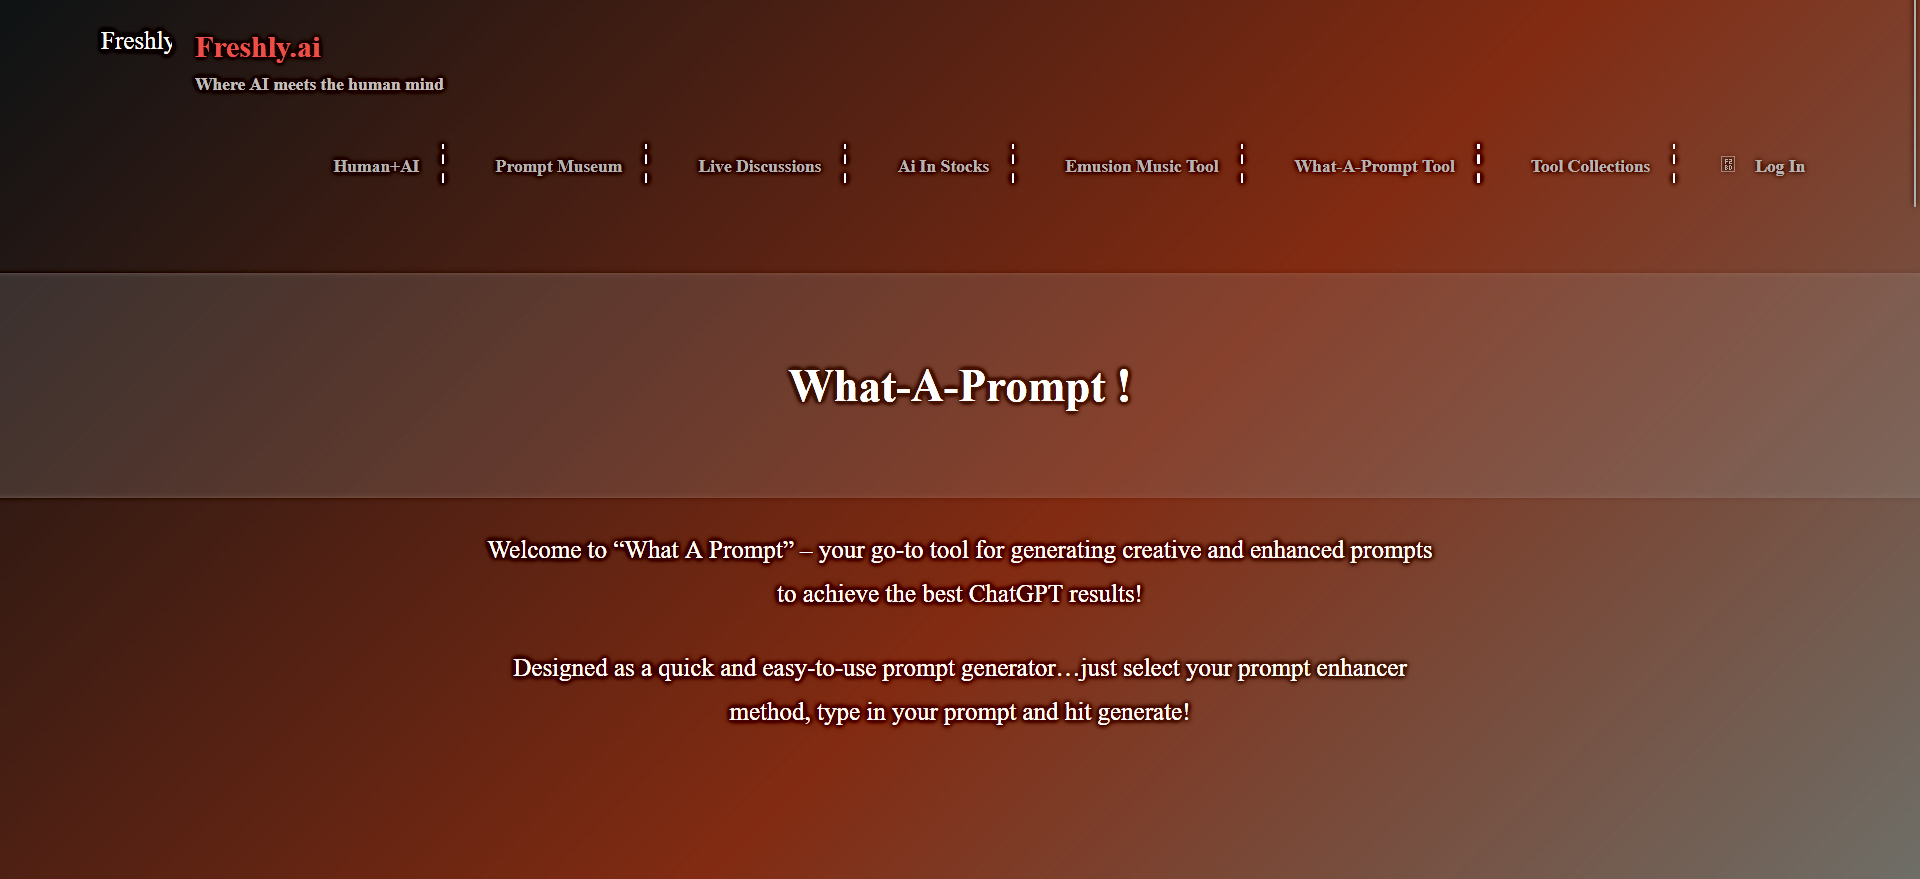 What-A-Prompt featured